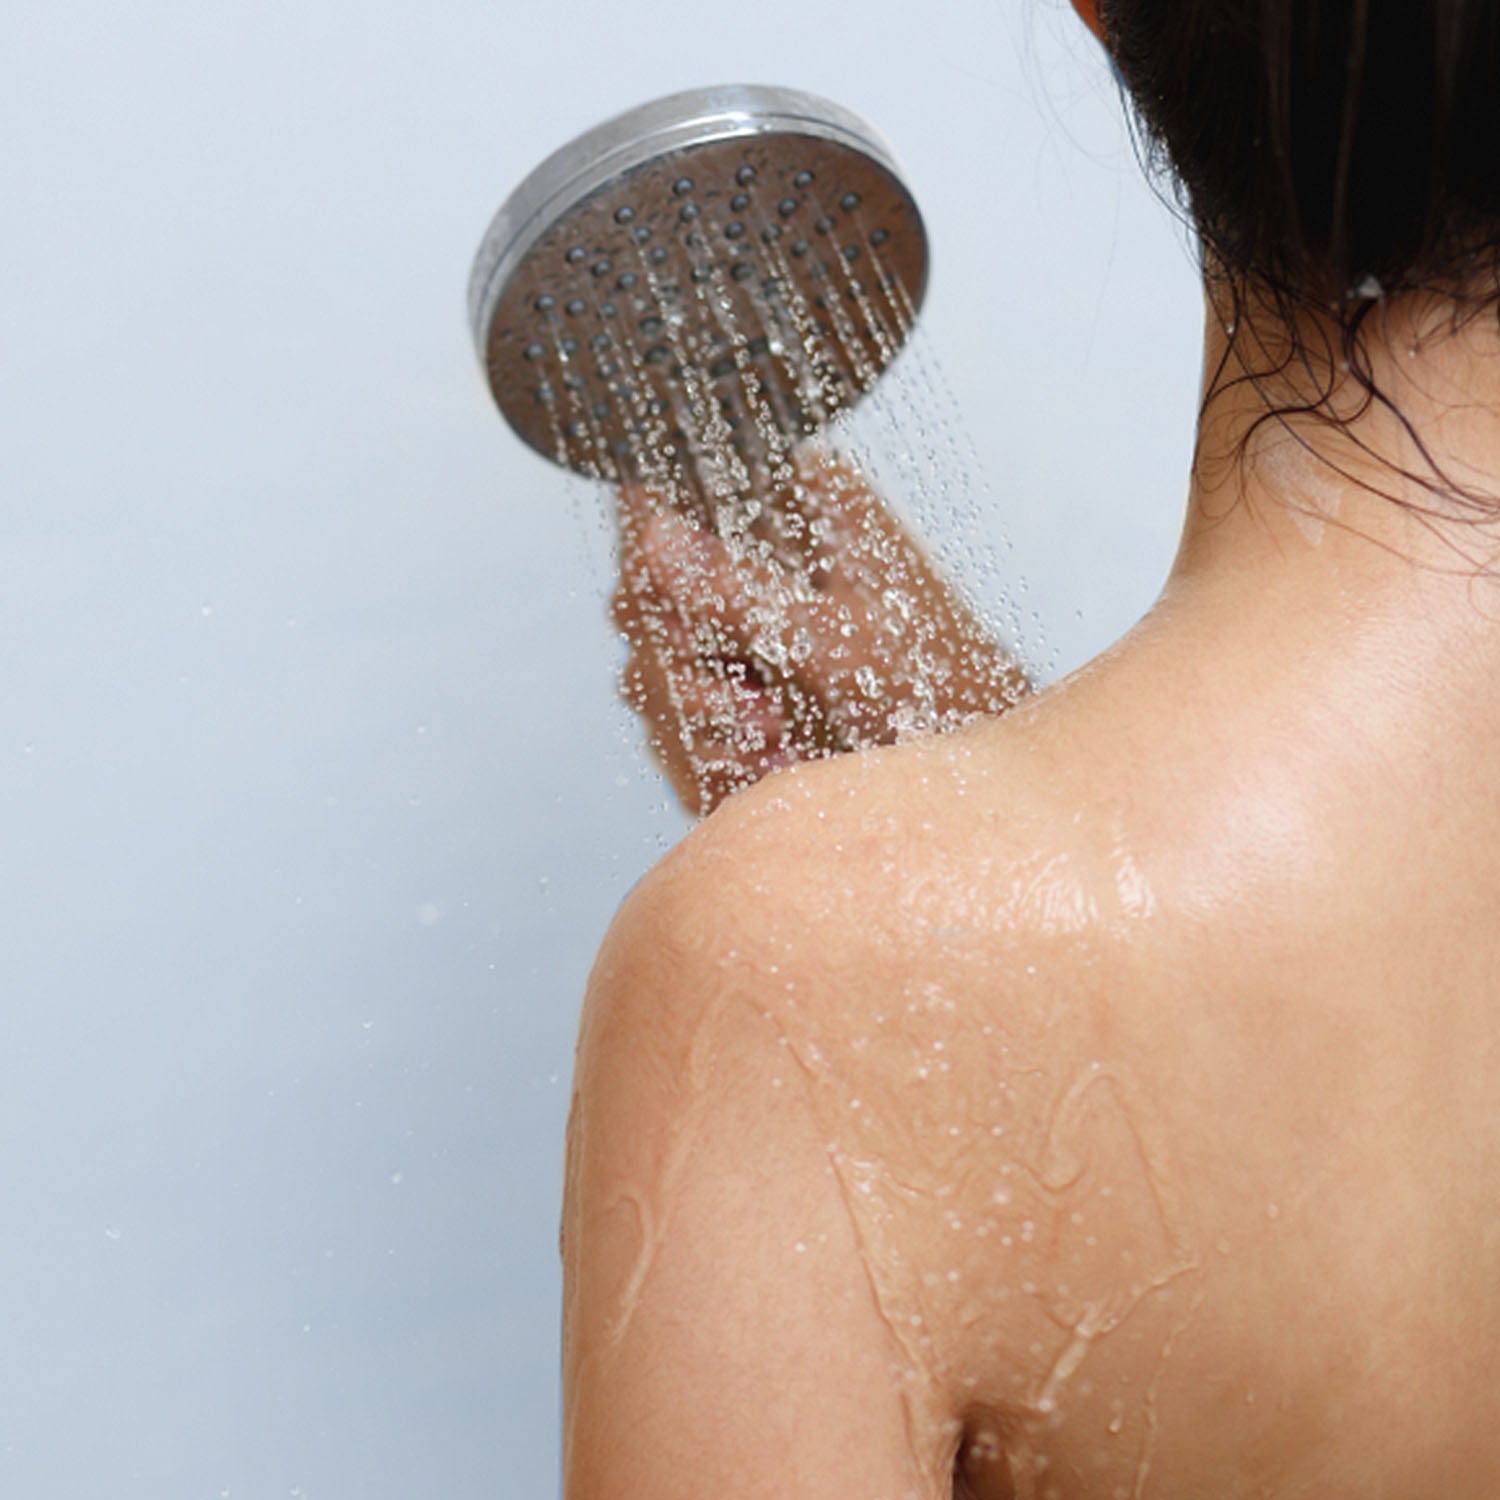 How Unfiltered Water Affects Your Skin